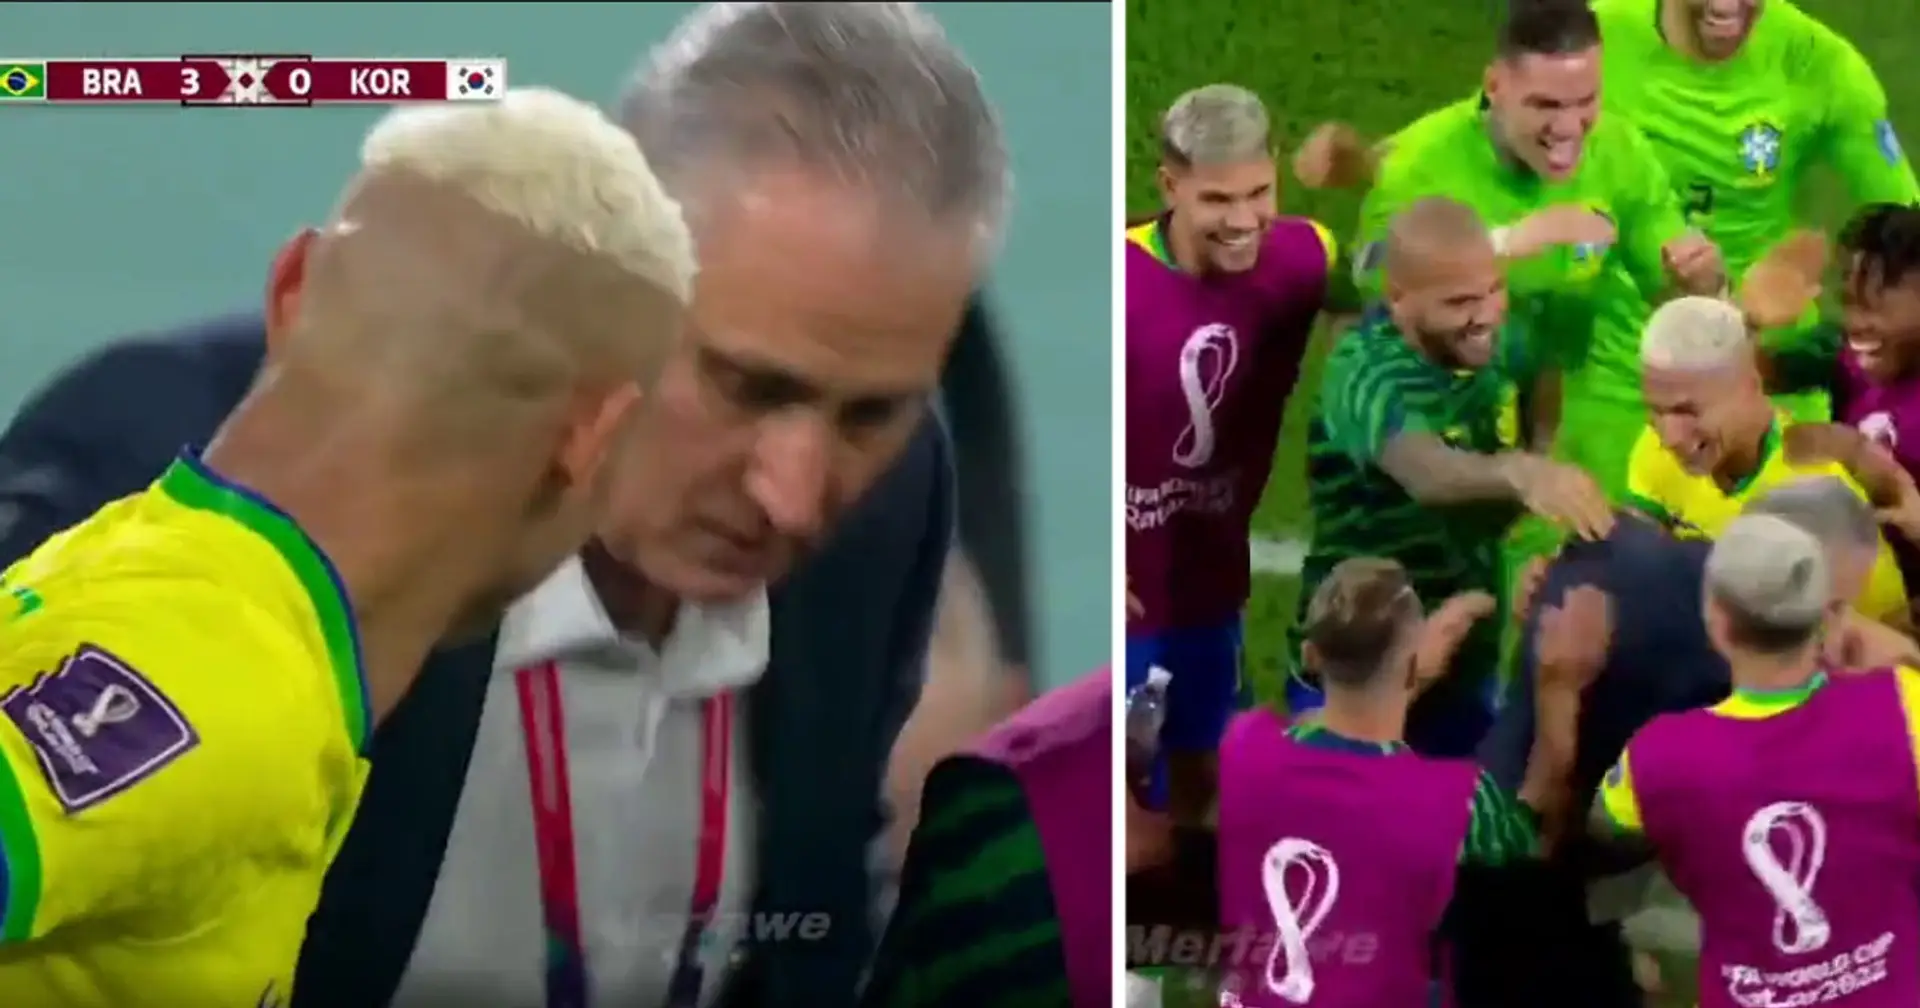 Brazil coach Tite dances with Vini Jr and co at World Cup